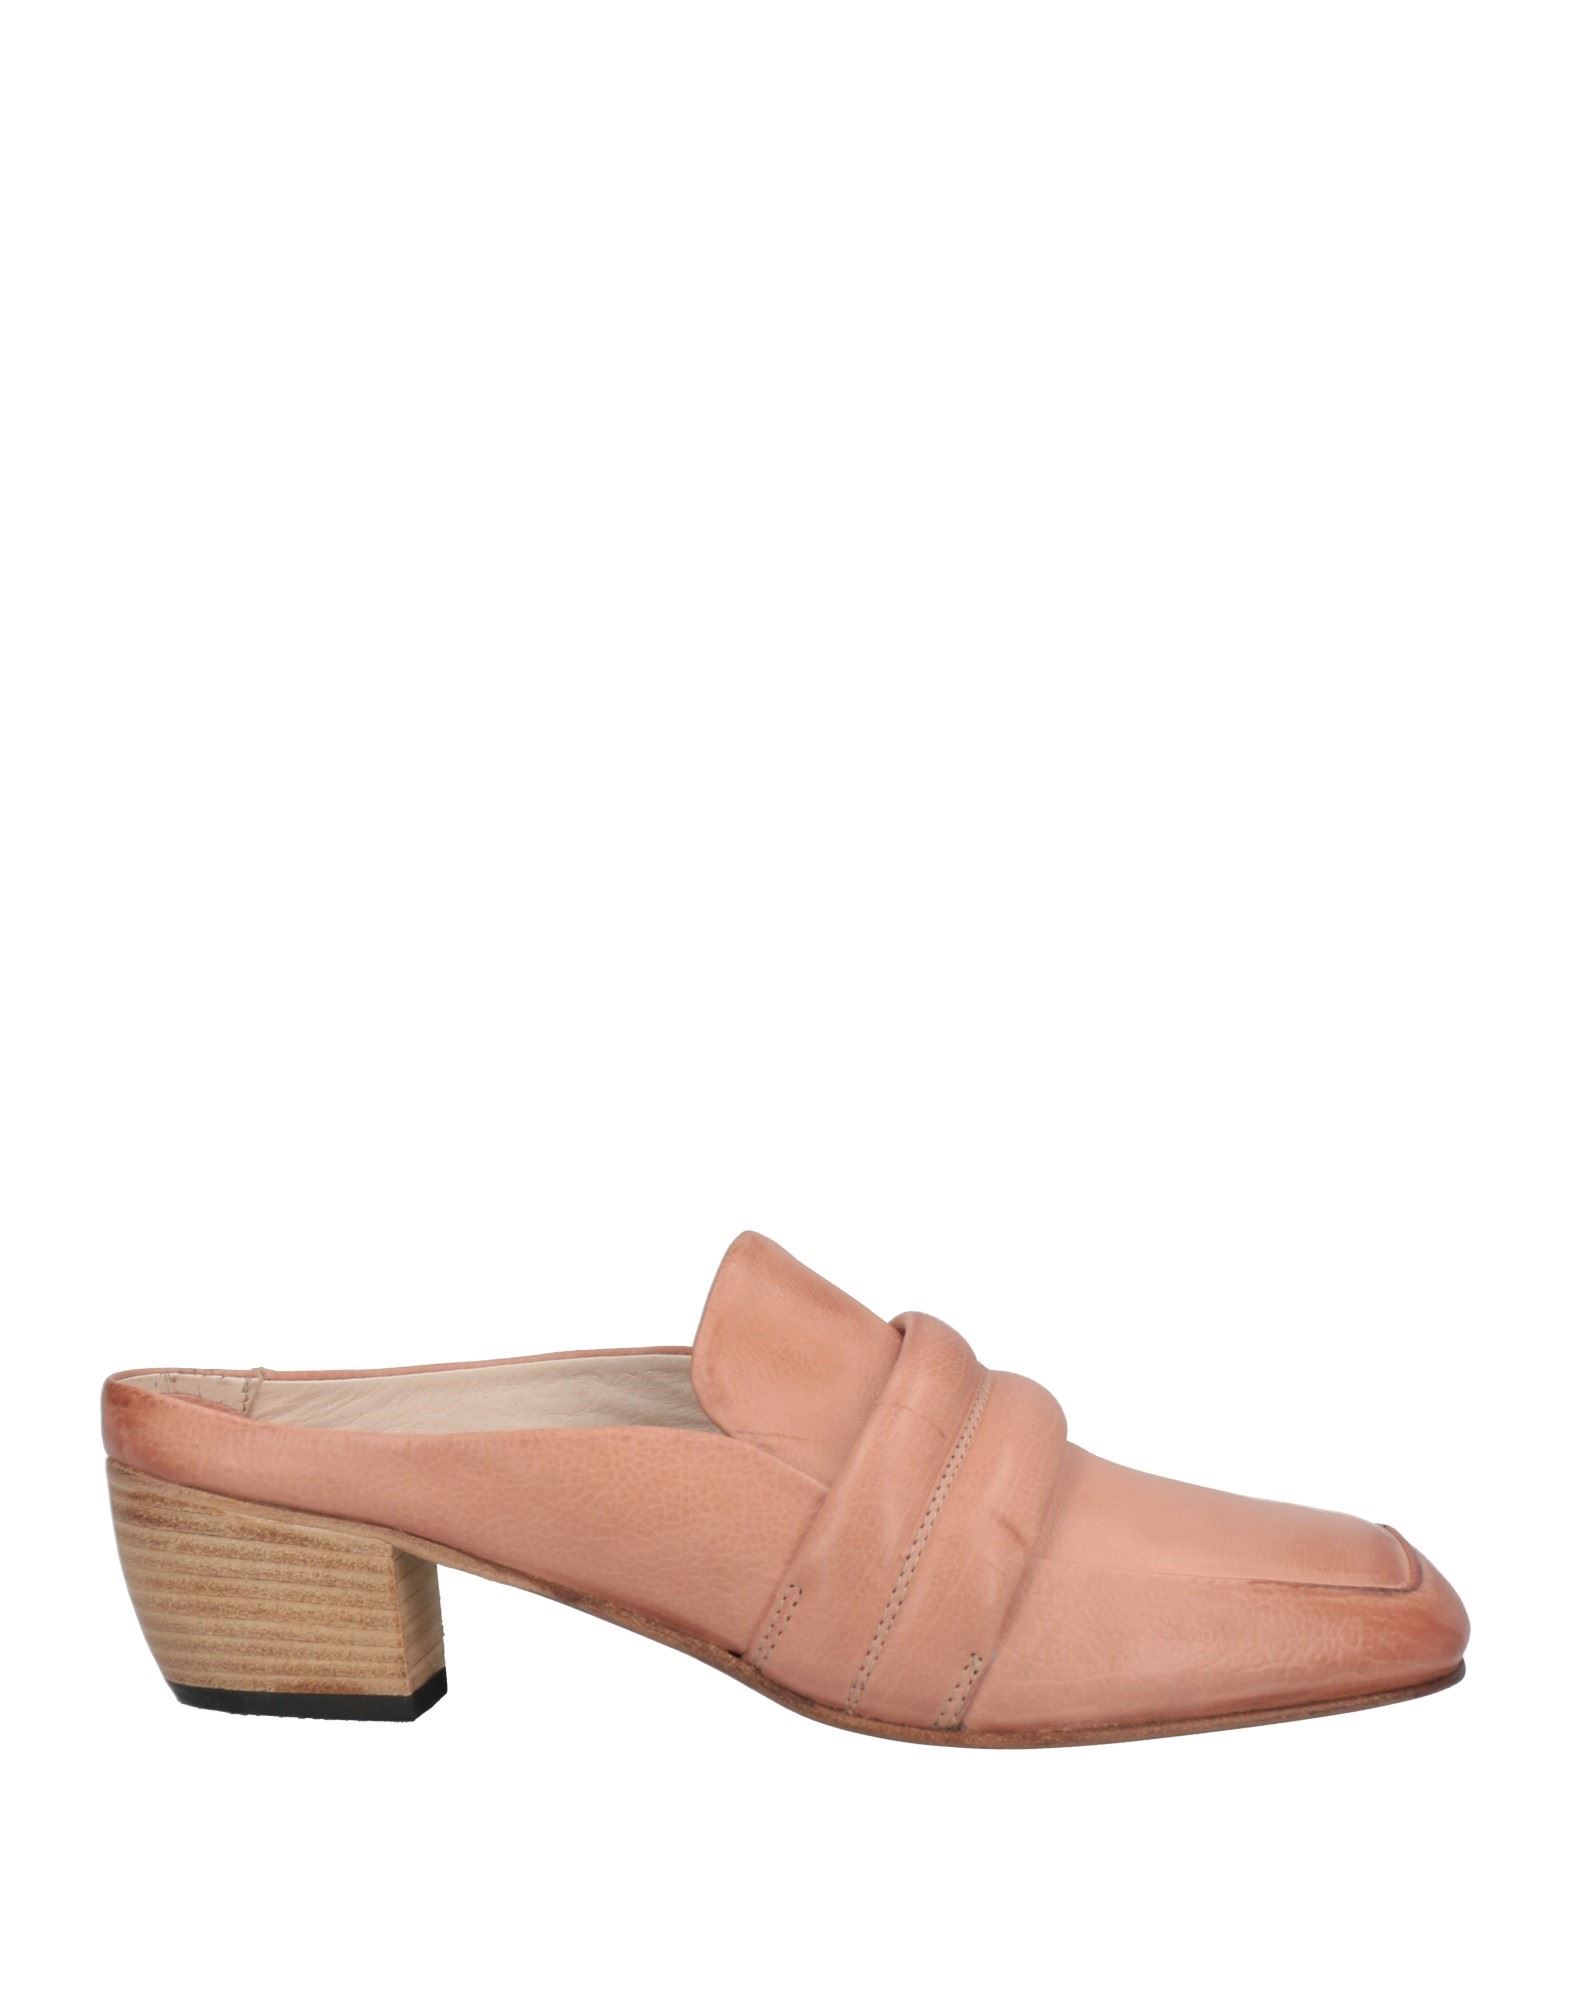 Moma Woman Mules & Clogs Pink Size 5 Soft Leather